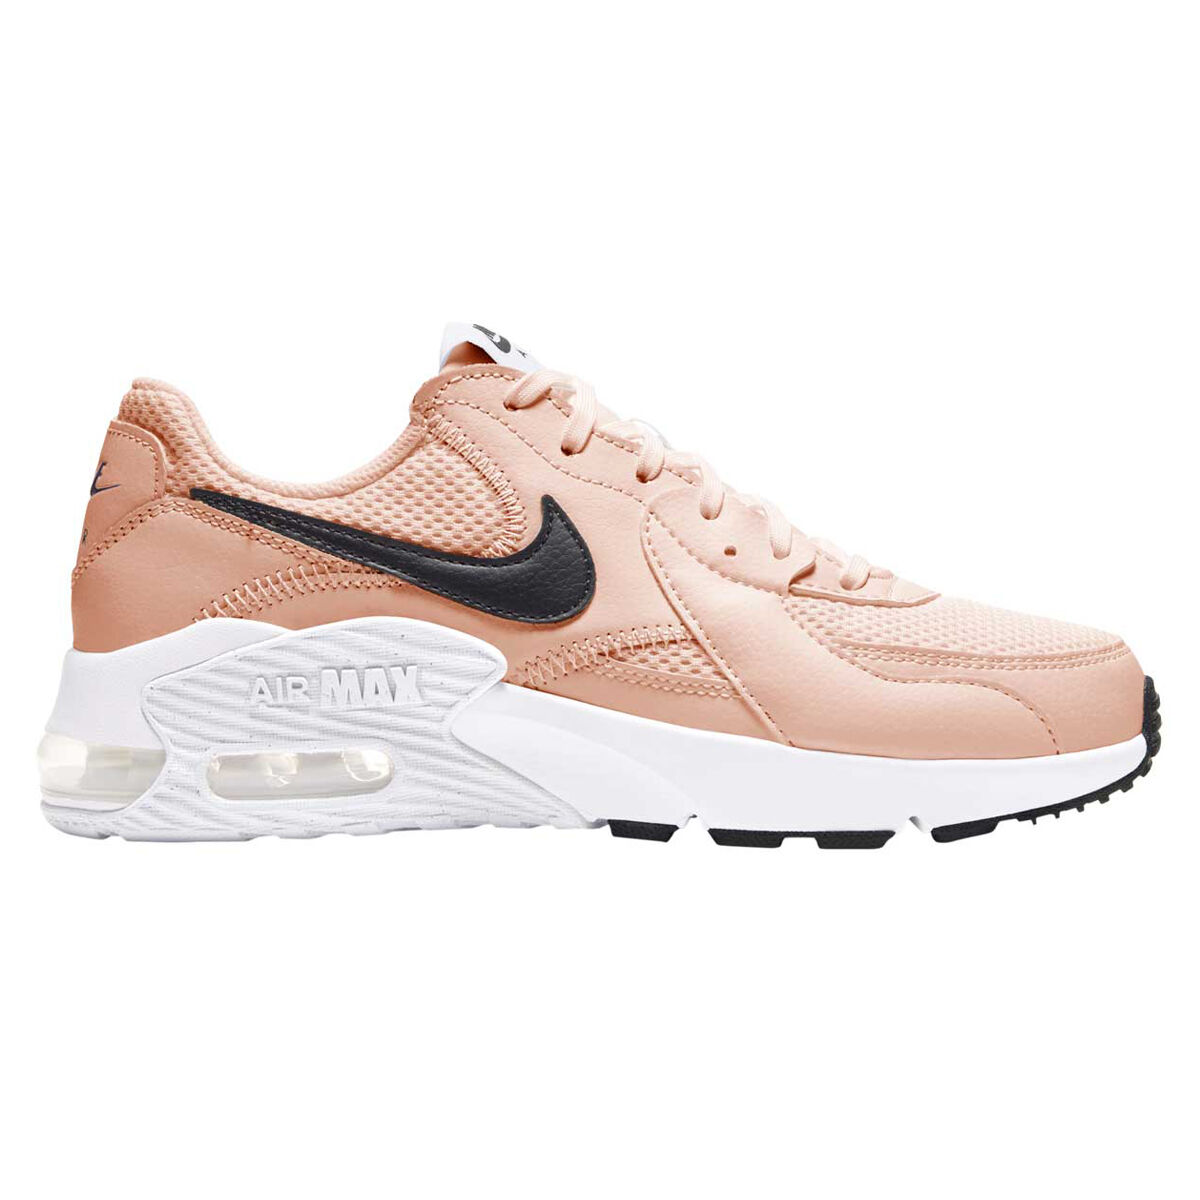 women's pink air max shoes